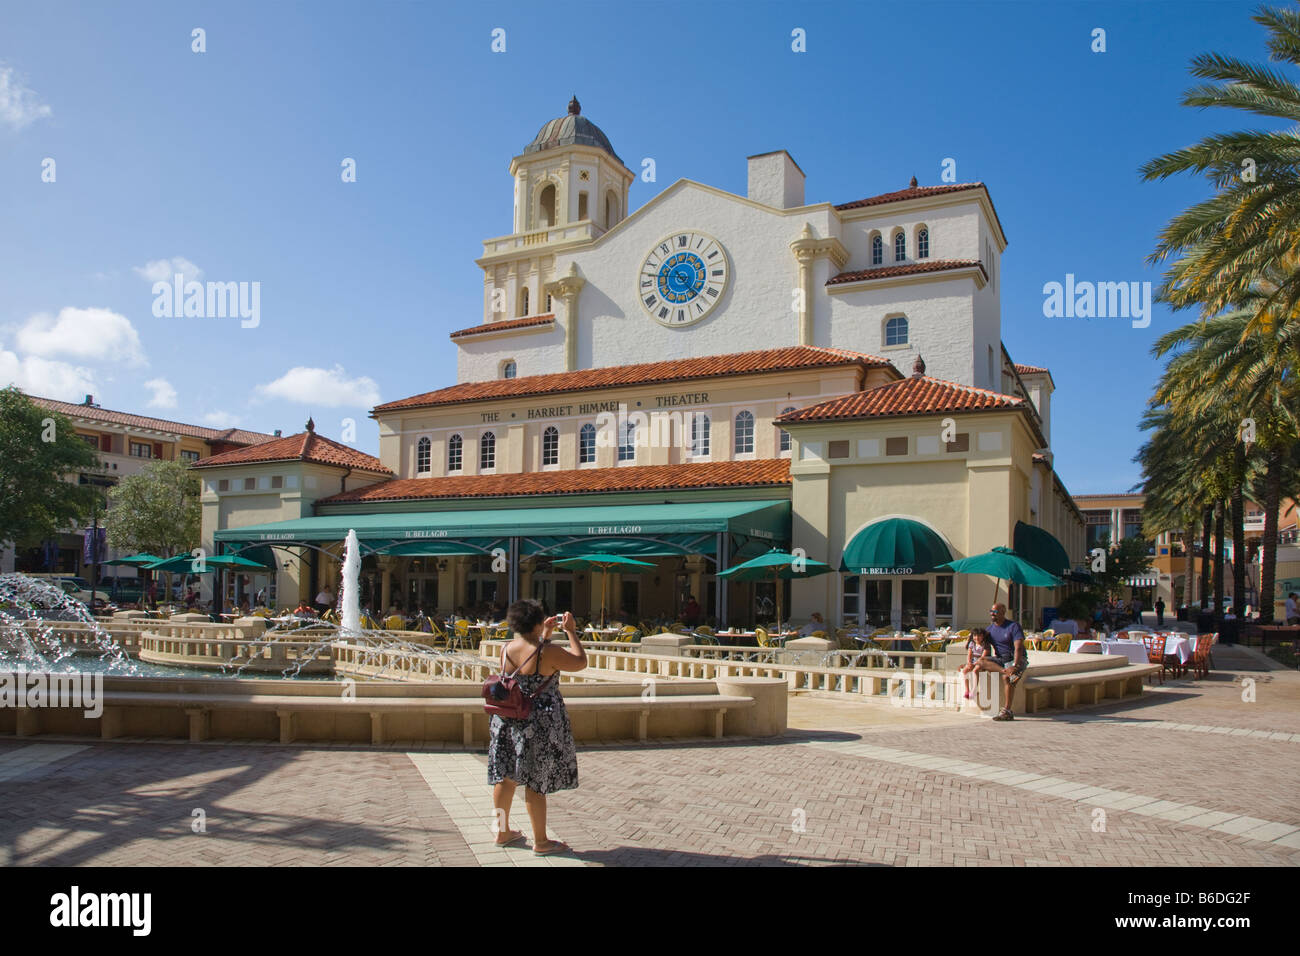 The Harriet Himmel Theater for Cultural Performing Arts at CityPlace in West Palm Beach Florida Stock Photo